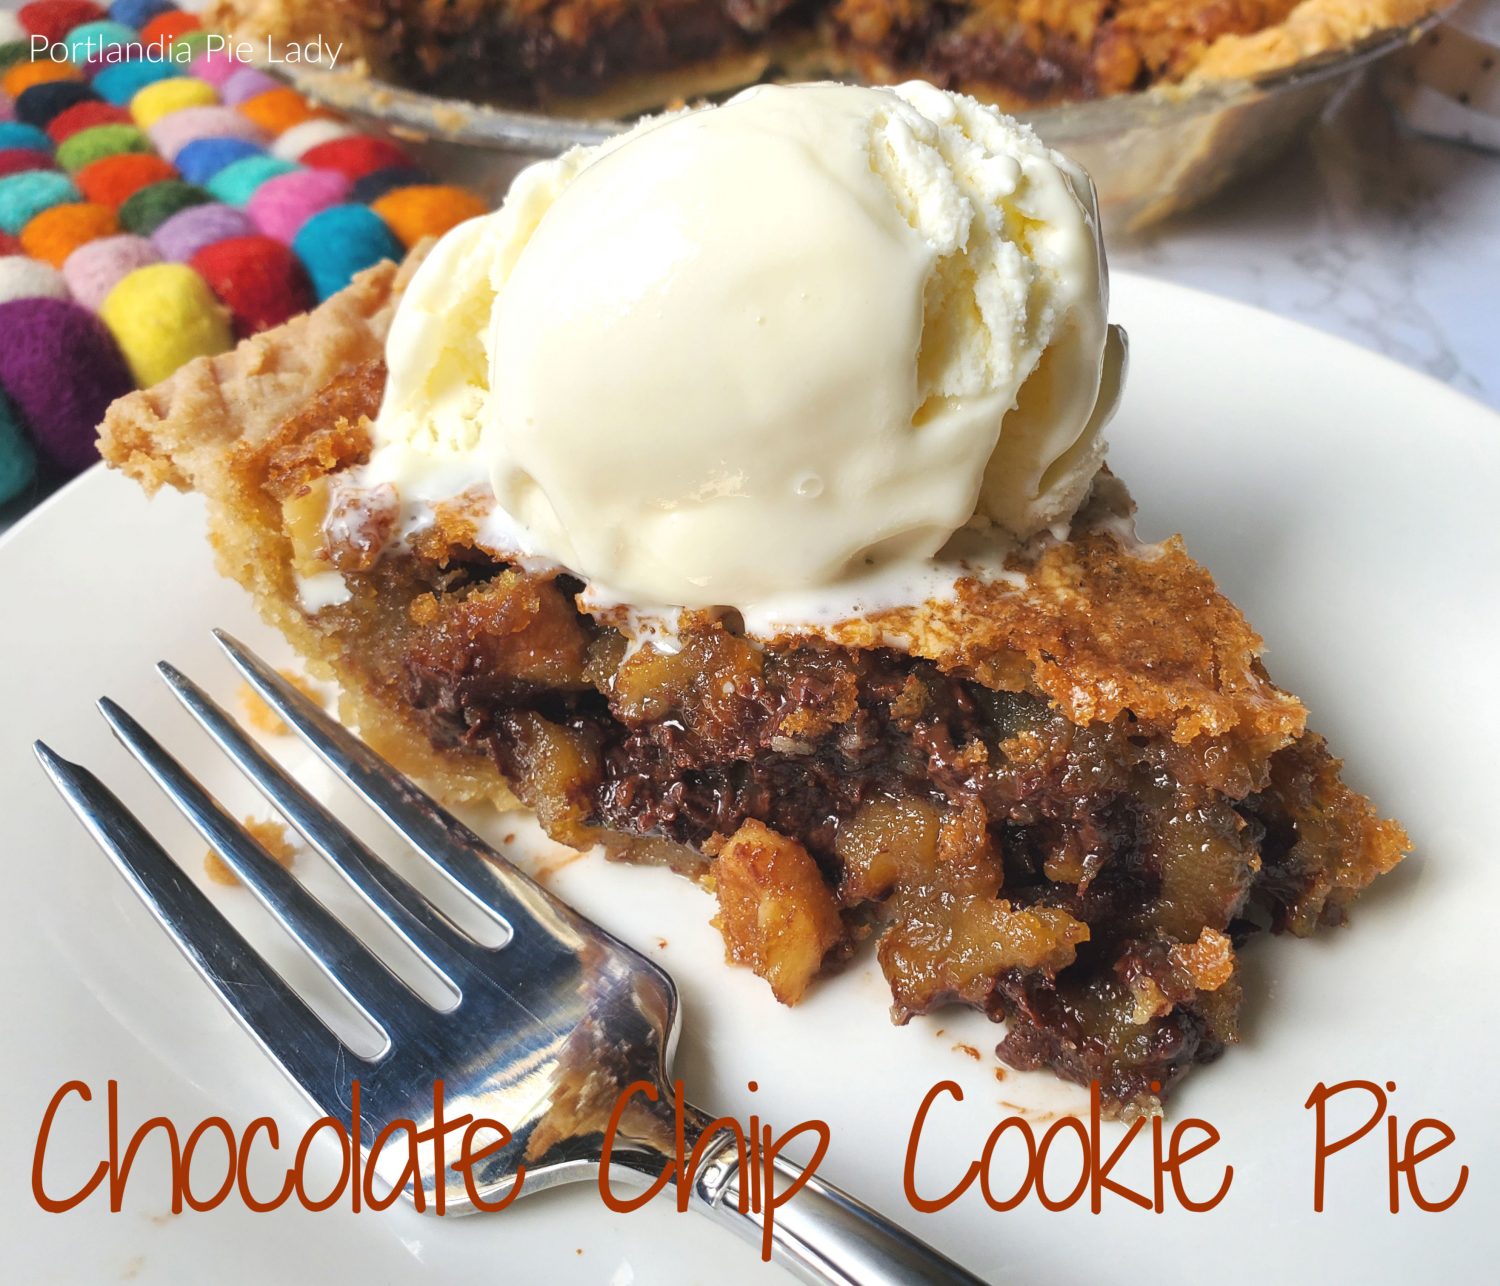 Gooey Chocolate Chip Cookie Batter Pie: Packed full of chocolate, walnuts, and a butter batter creating a gooey luscious filling and buttery flaky crust!